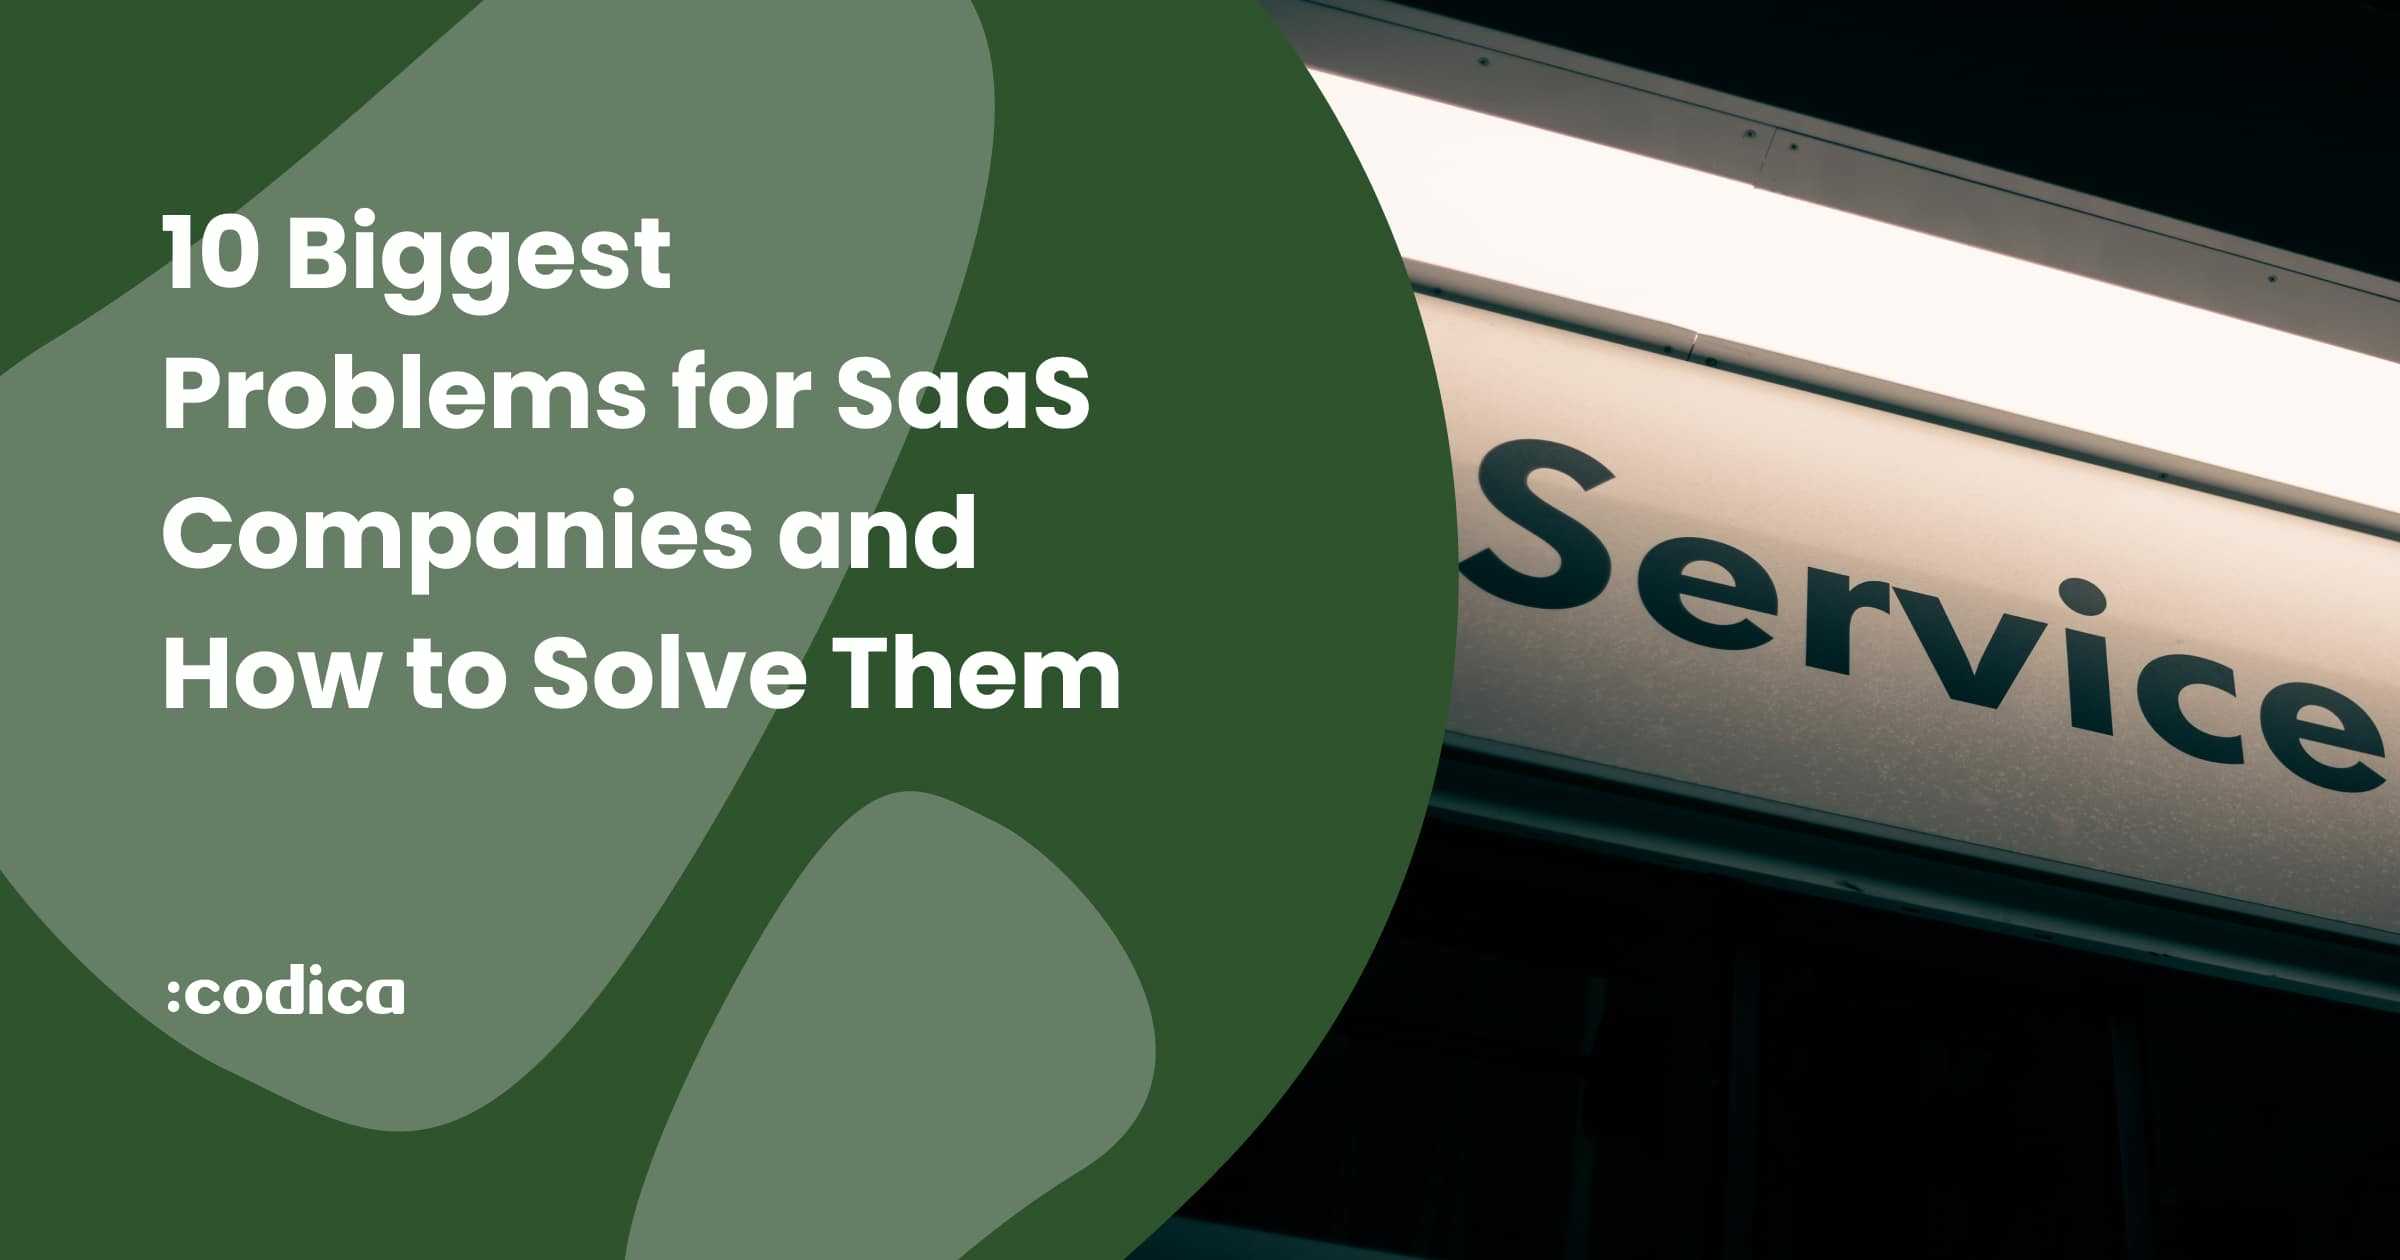 10 Biggest
Problems for Saas
Companies and
How to Solve Them

:codica